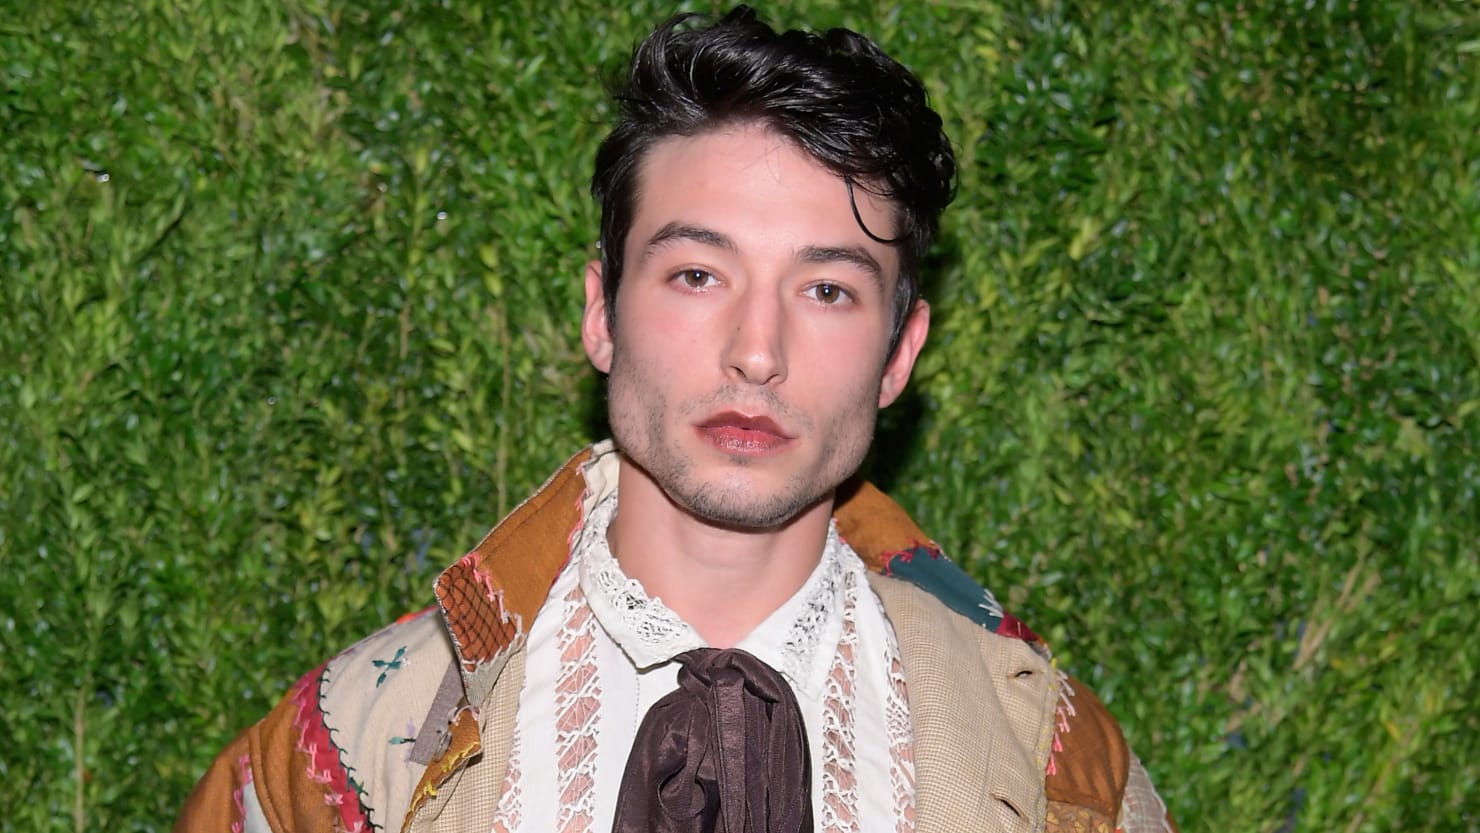 Justice League fans should not forget about the video Ezra Miller Attack